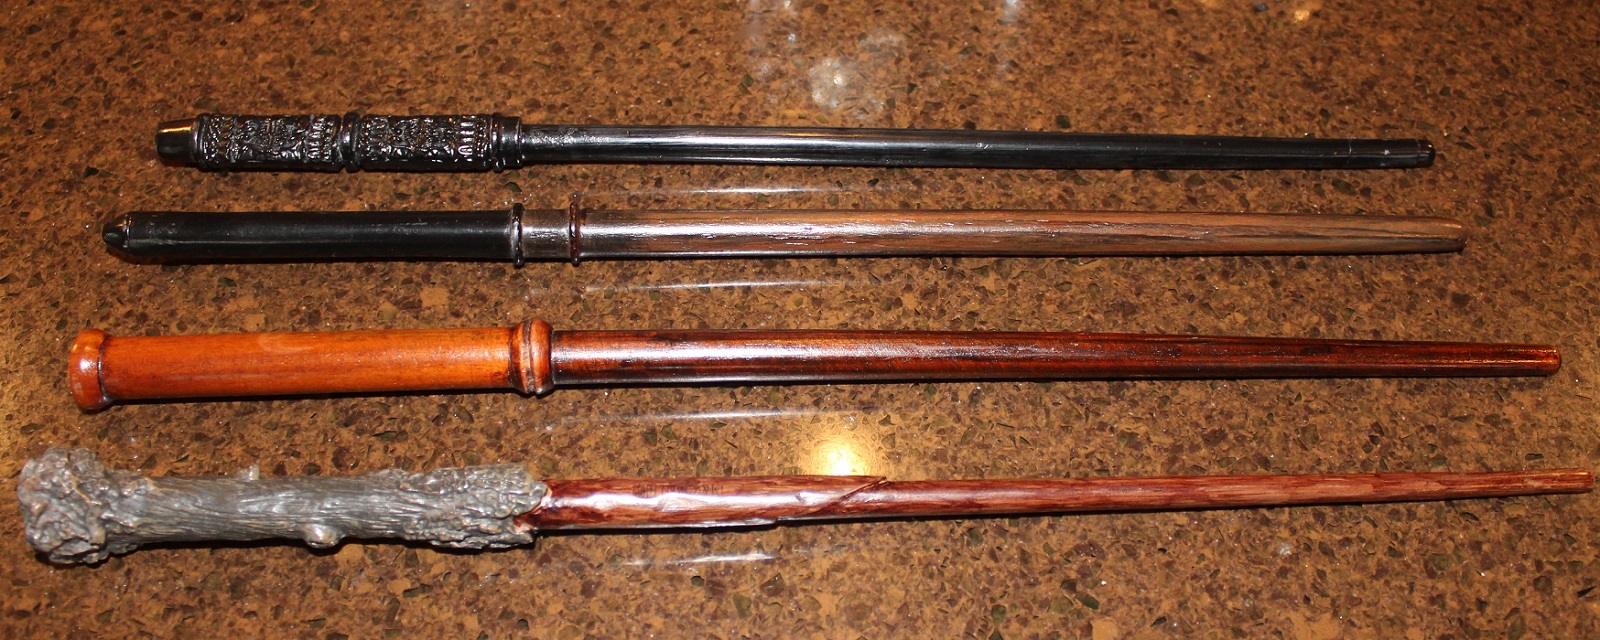 Two Techniques for Making Harry Potter Wand Props